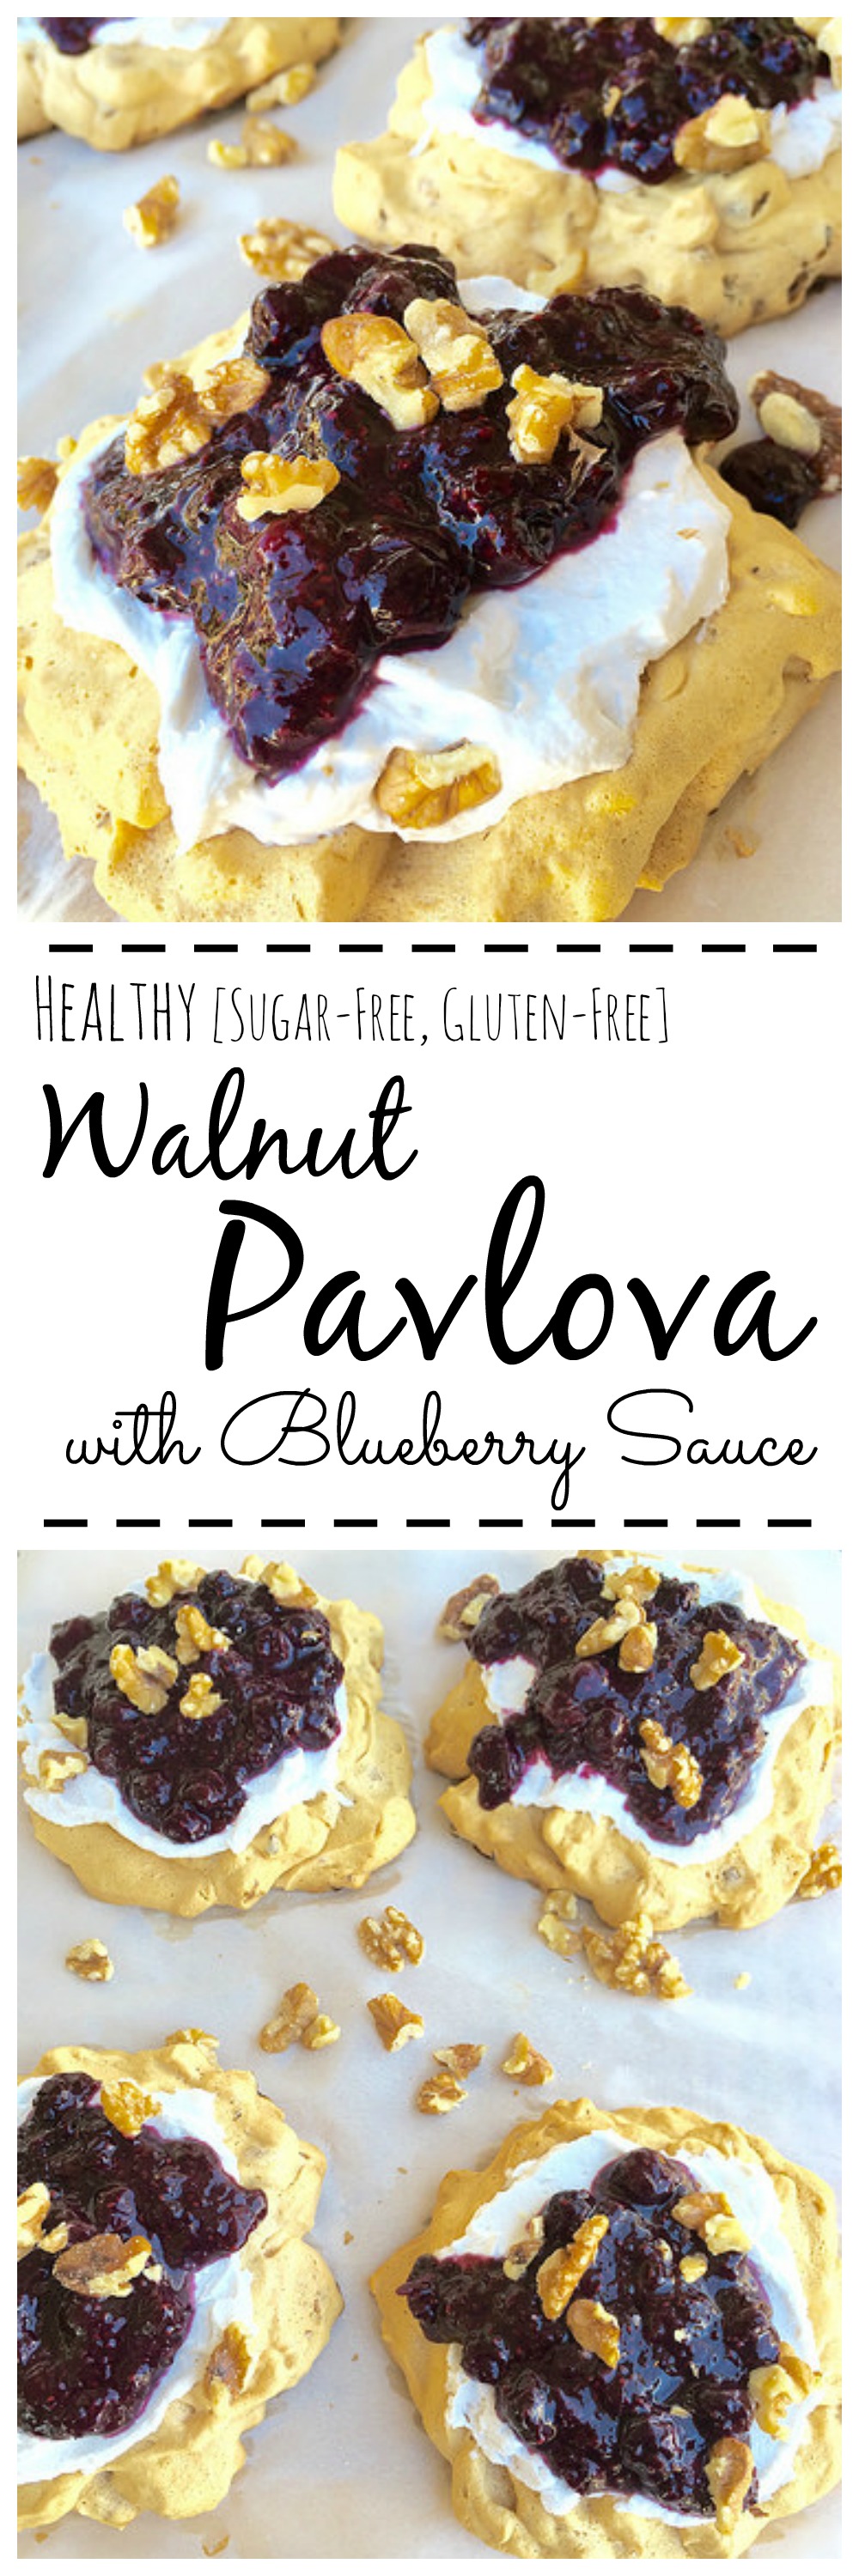 Healthy Walnut Pavlova with Blueberry Sauce - this sugar-free, gluten-free dessert is tastes decadent but is perfectly light for the summer!